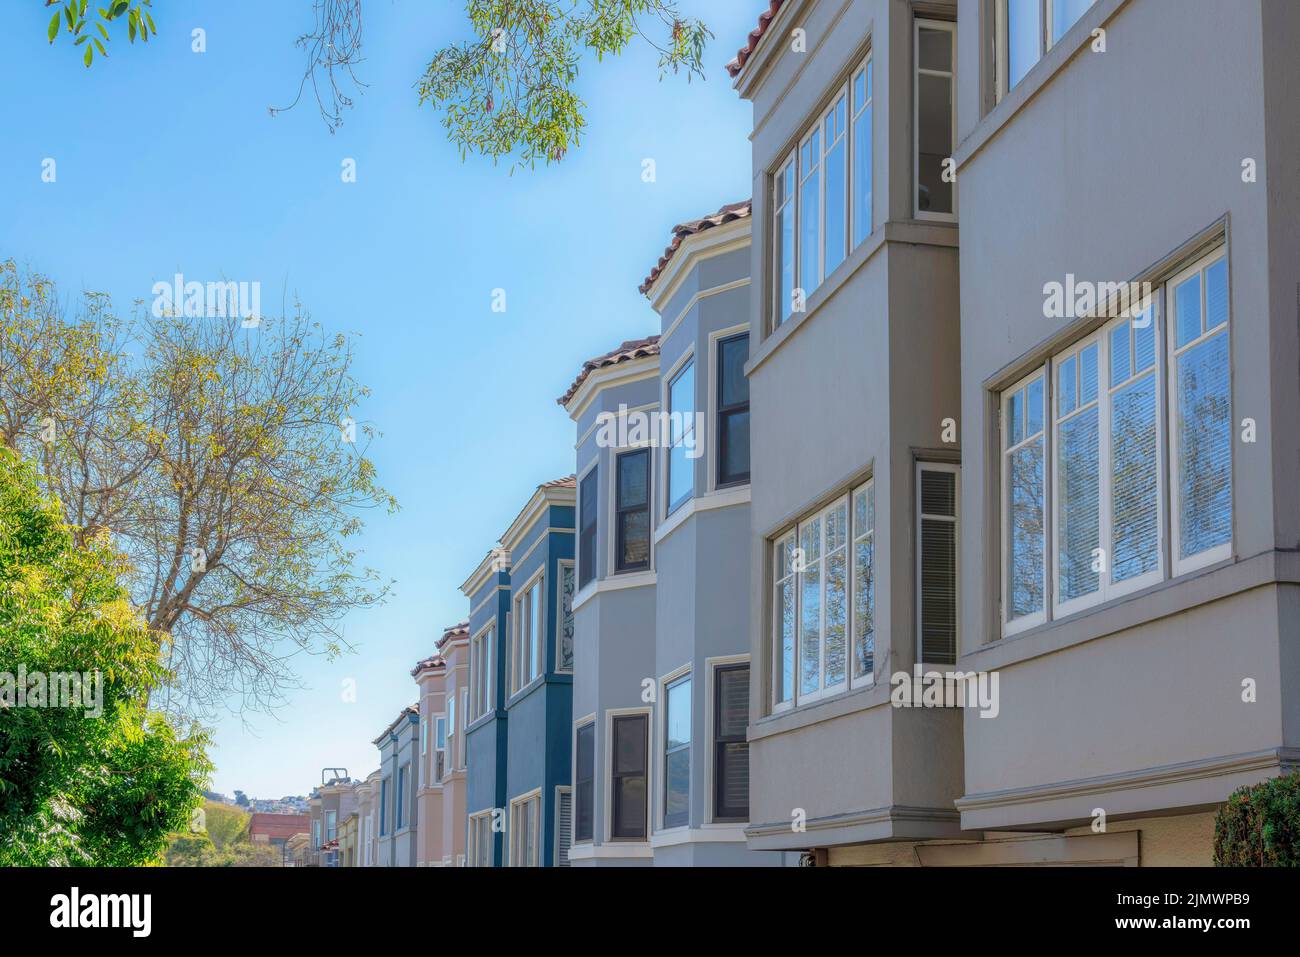 Row of townhouses on the right with bay windows against the clear sky in San Francisco, California. There are trees on the left across the townhouses Stock Photo